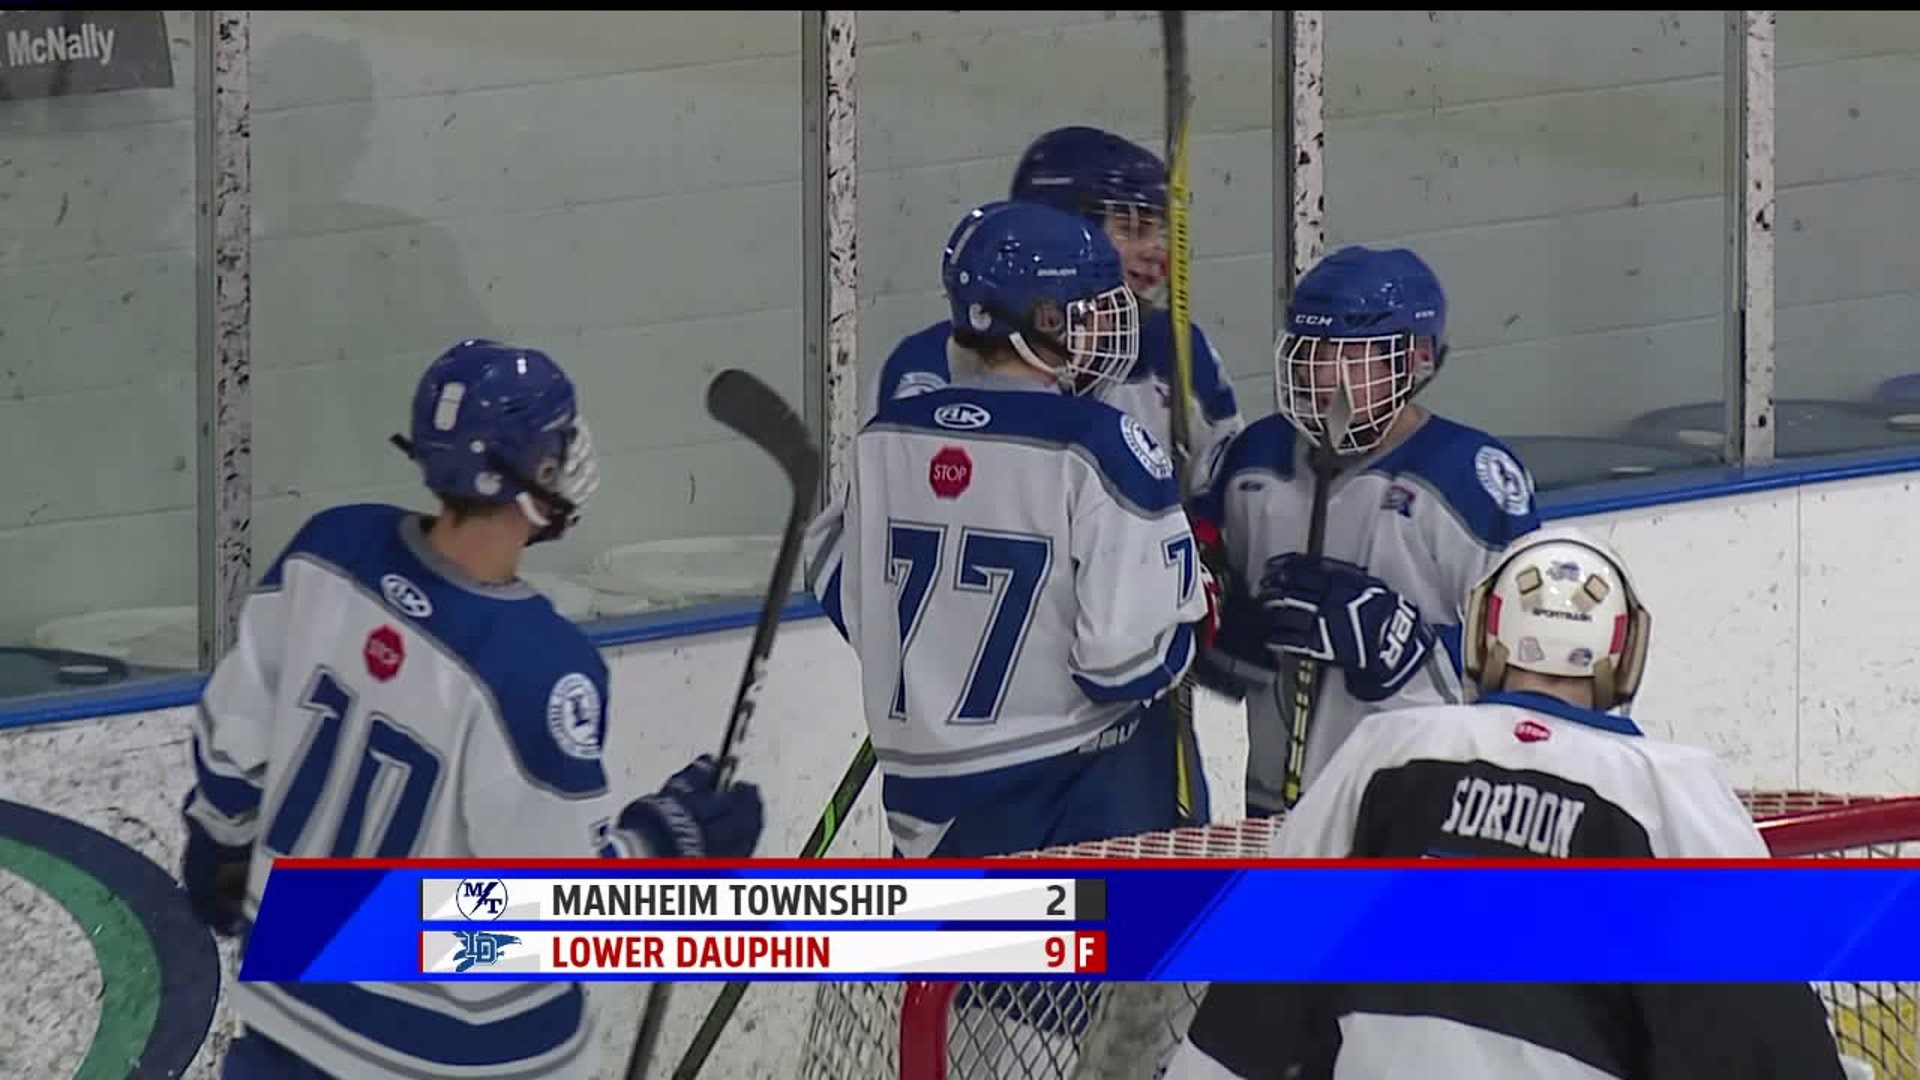 Lower Dauphin moves on in CPIHL Playoffs